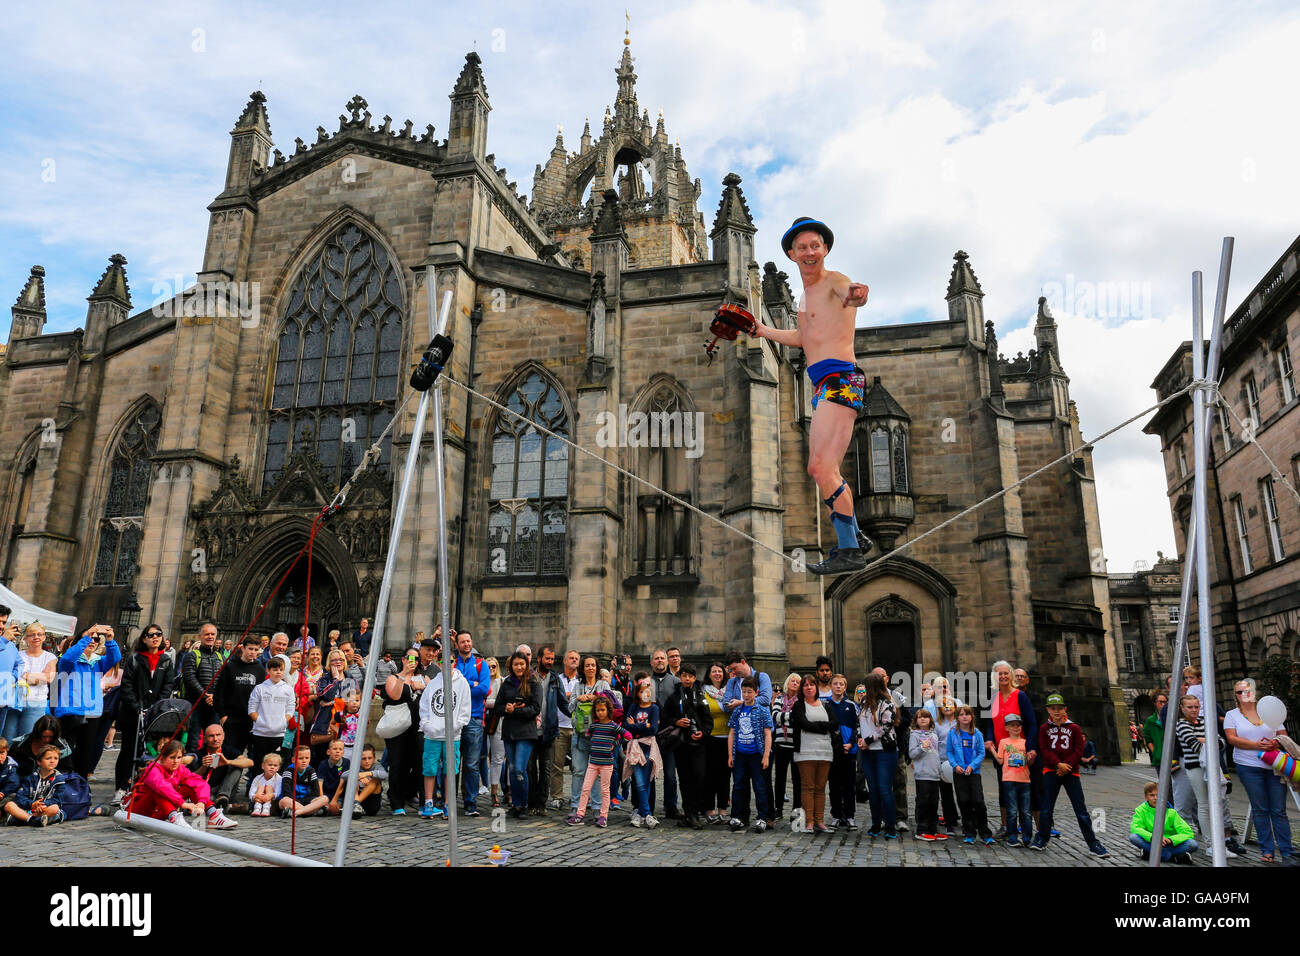 Edinburgh, UK. 05th Aug, 2016. The 69th Edinburgh Fringe Festival, considered to be the biggest Arts Festival in Britain started today with a selection of the usual acts of jugglers, magicians, musicians, comedians and vaudeville acts plying their trade along High Street and The Royal Mile. The Fringe and Festival is an annual attraction and it brings tourists from across the world to Edinburgh for 3 weeks of entertainment. Credit:  Findlay/Alamy Live News Stock Photo